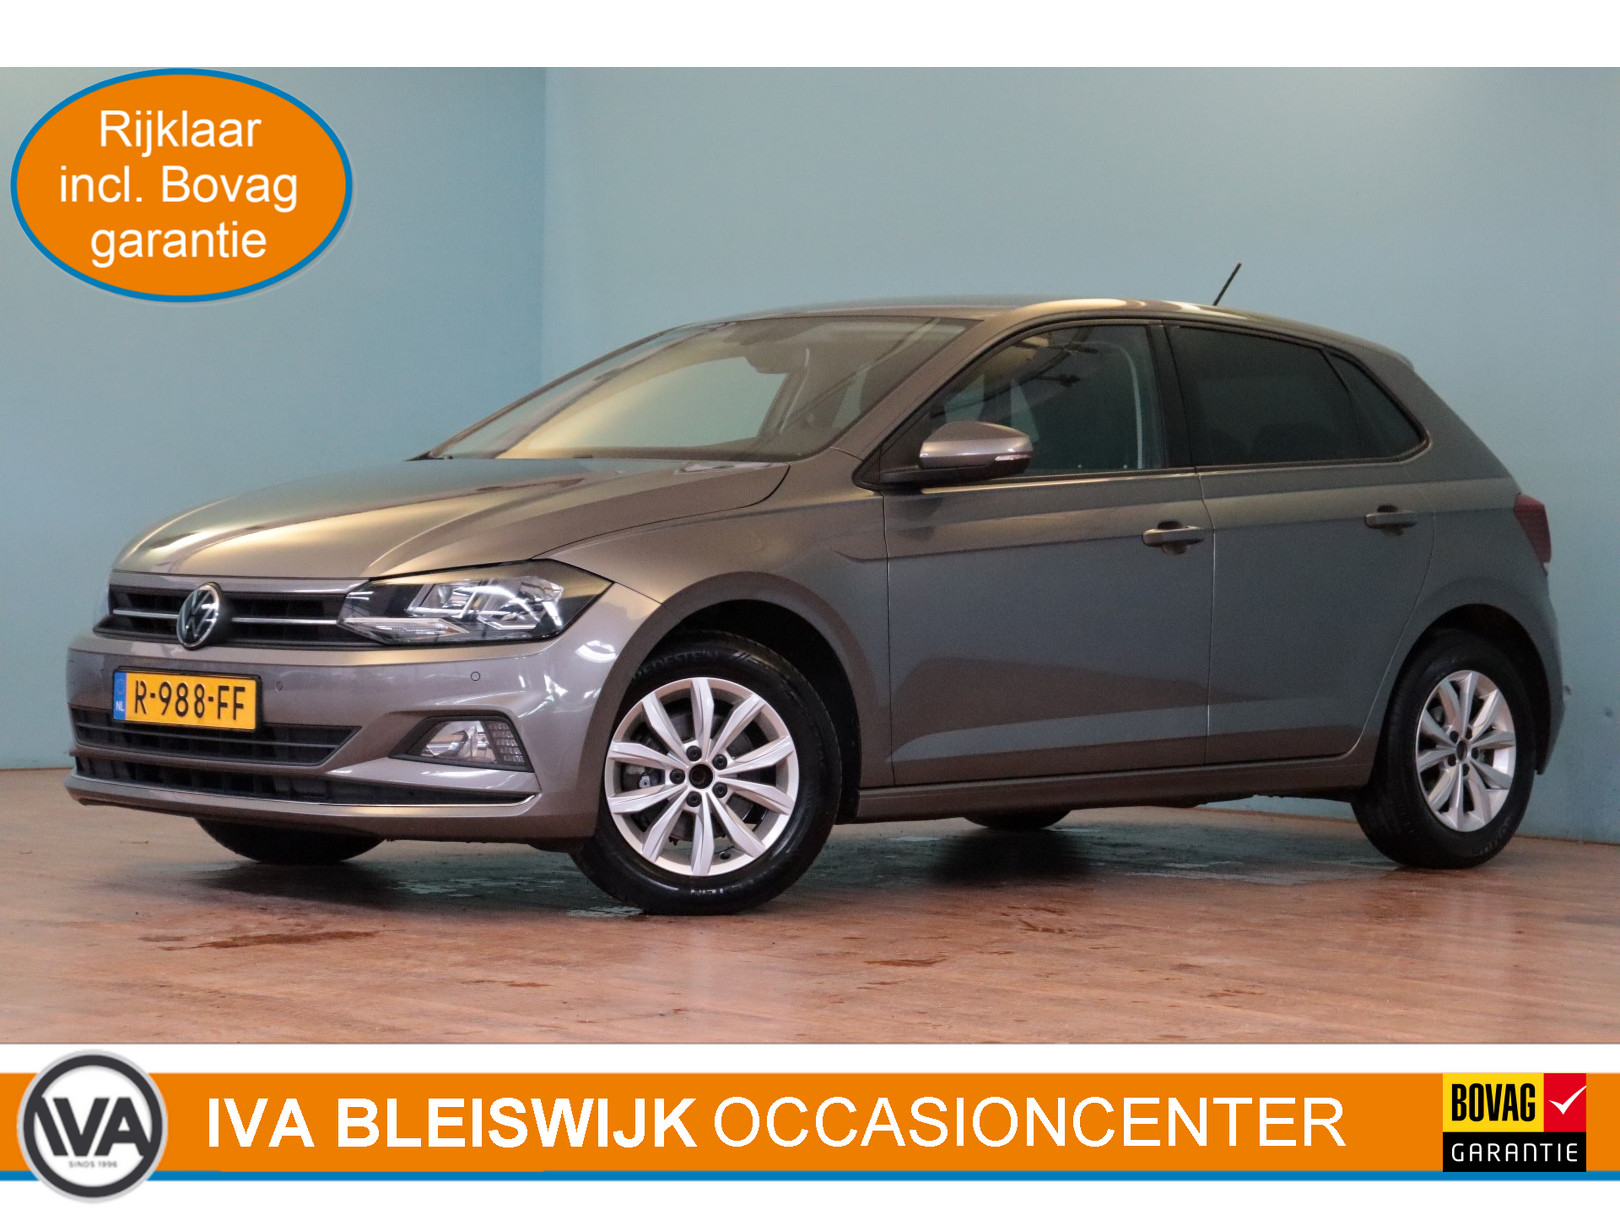 Volkswagen Polo 1.0 TSI Automaat | APPCONNECT | CLIMA | PDC V+A | ADAP CRUISE | STOELVERW | bij viaBOVAG.nl